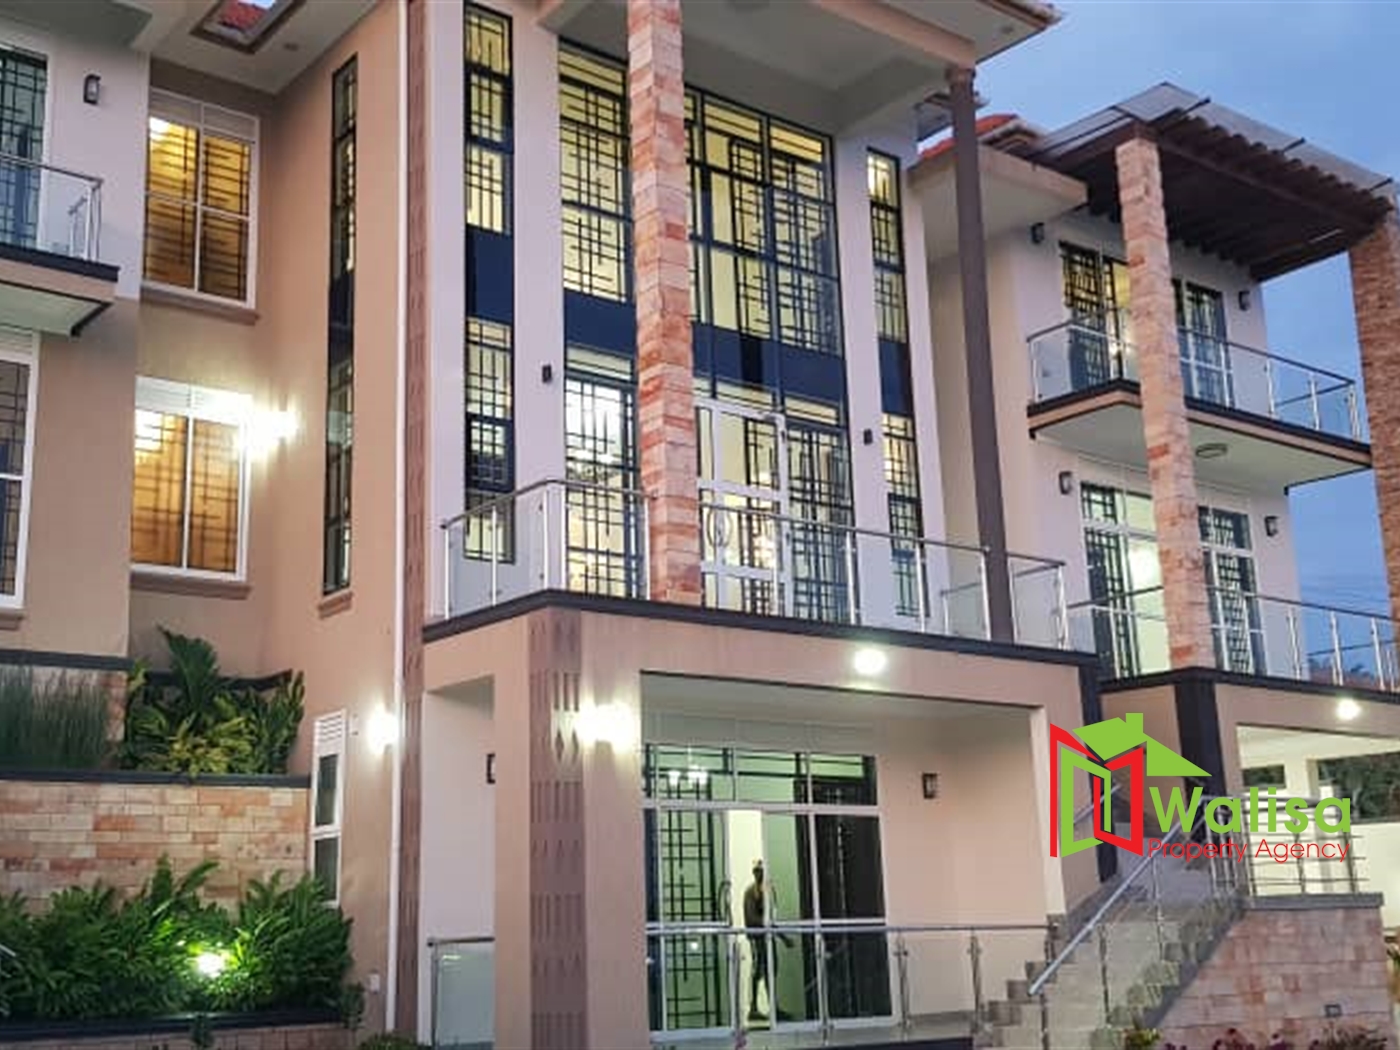 Mansion for sale in lubowa Wakiso